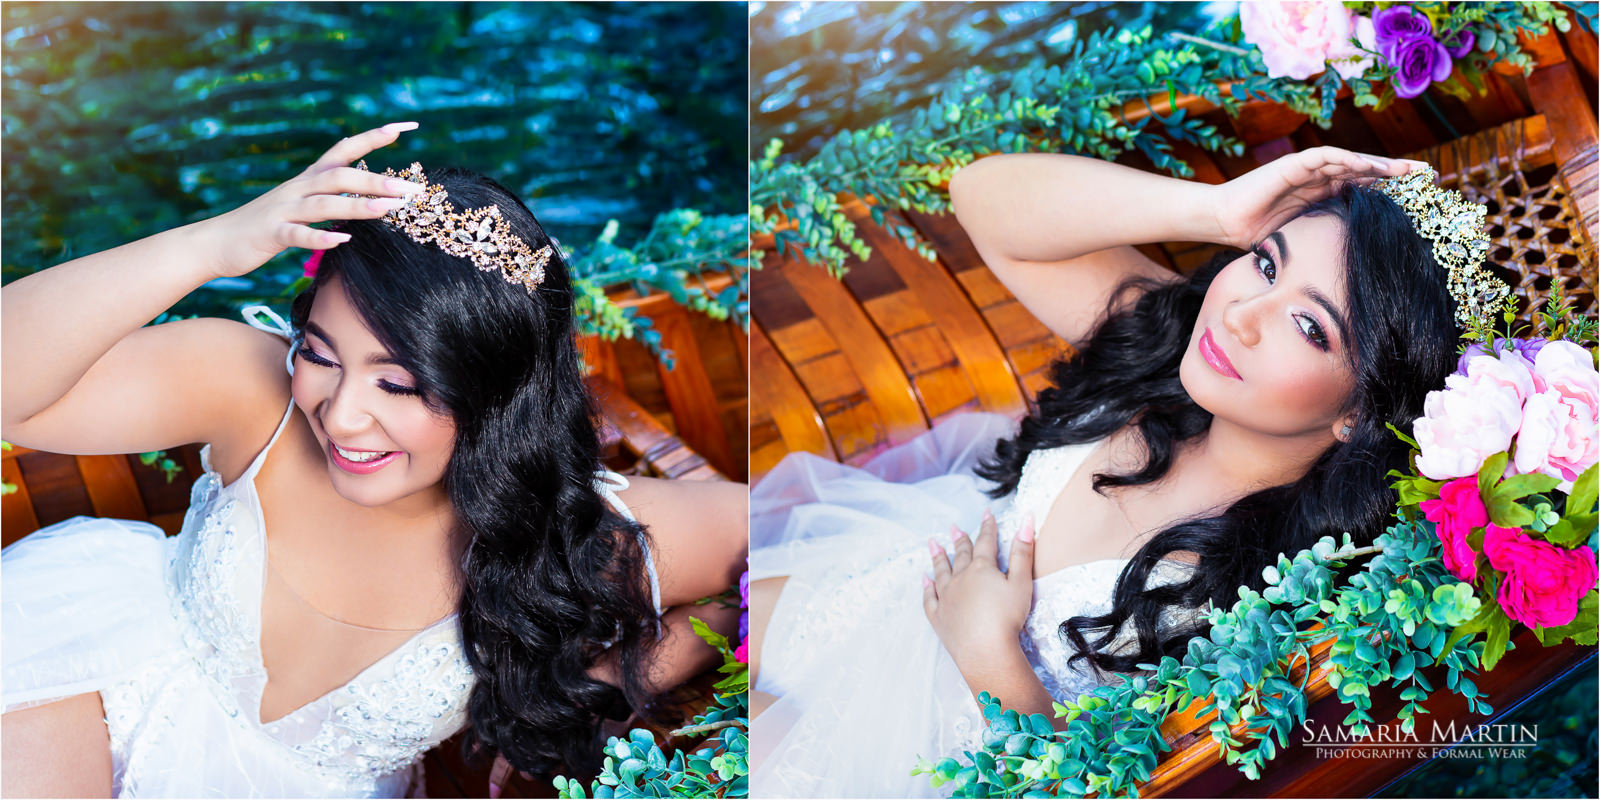 Quinceanera photoshoot in a lake, rent of quinceanera dress, quince photoshoot, quinceanera photography and dresses by Samaria Martin